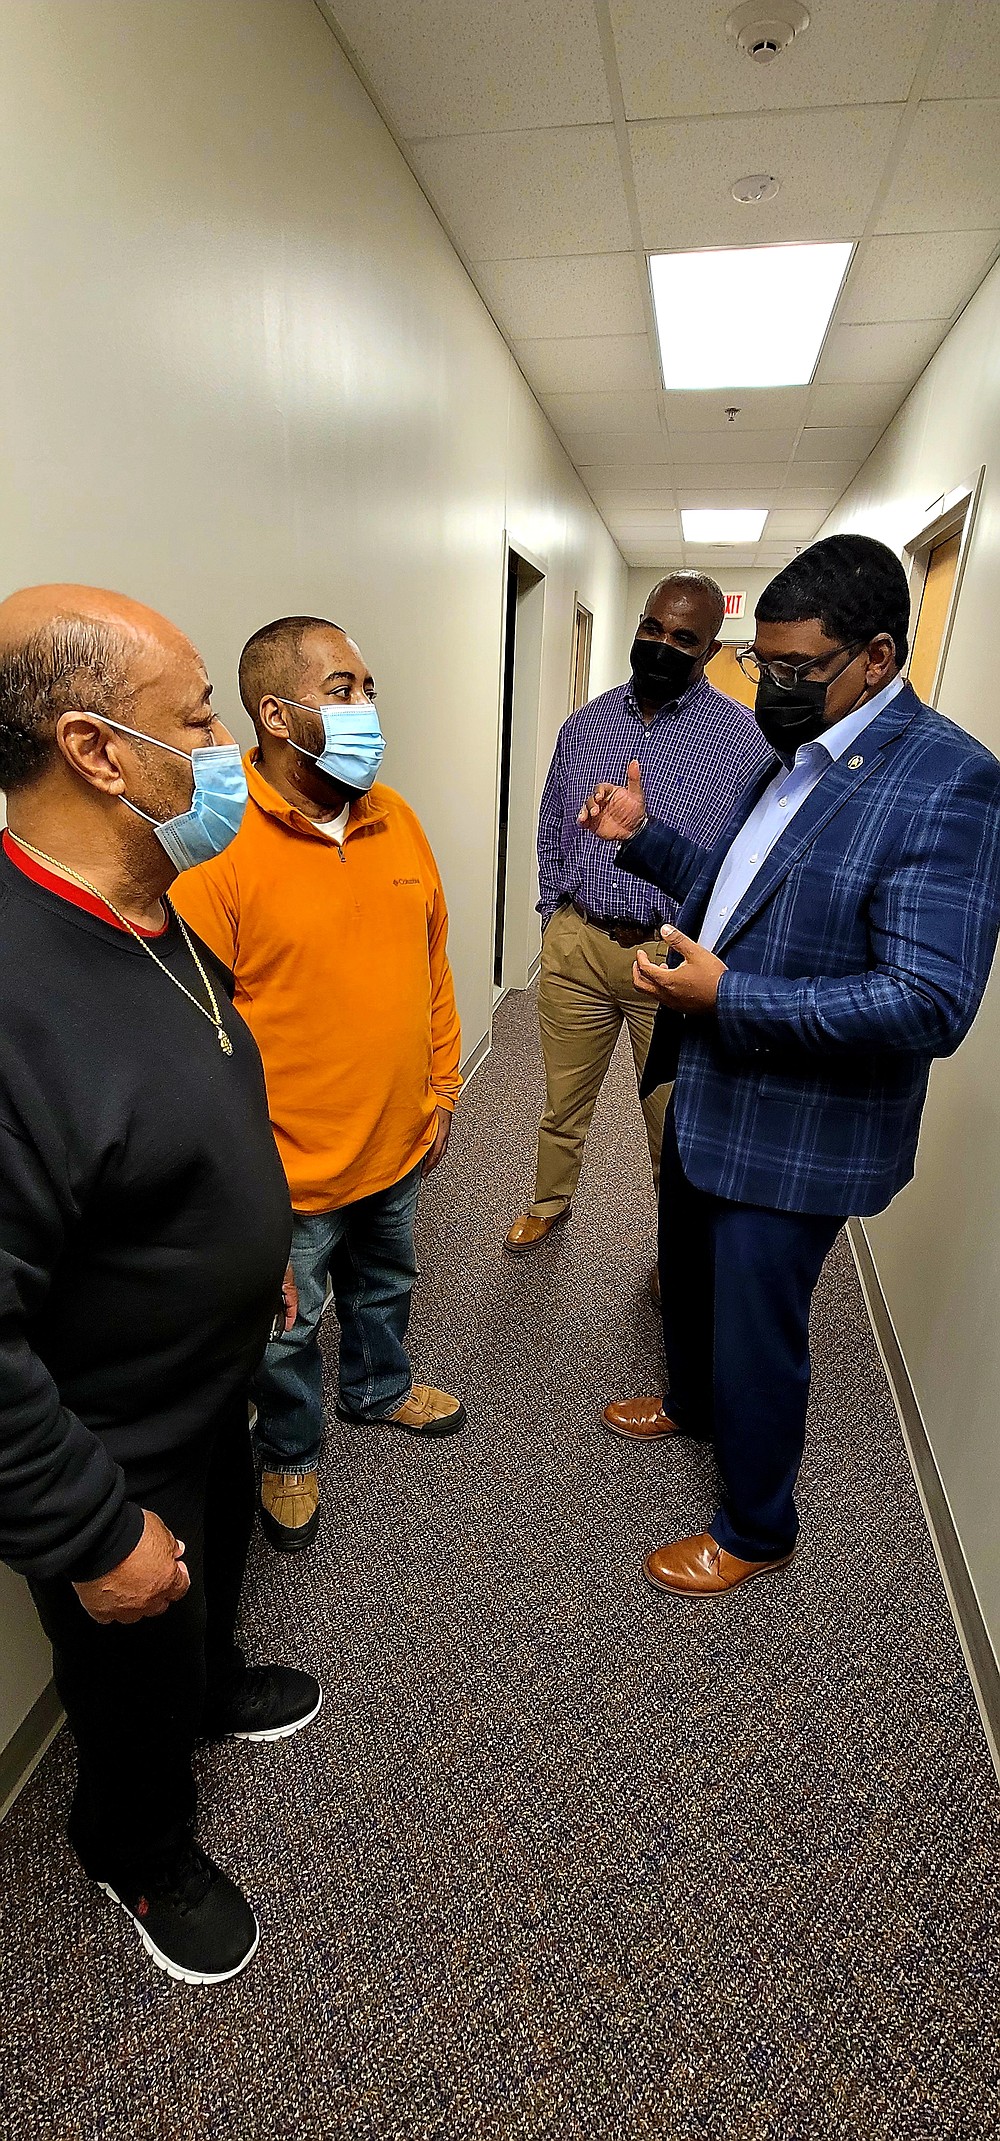 Jefferson County Sheriff Lafayette Woods Jr. (right) and Chief Deputy Stanley James (second from right) tell Lt. Kaylon McDaniel (second from left) how so many people were praying for his recovery. Standing next to McDaniel is his father, Thomas McDaniel. (Pine Bluff Commercial/Eplunus Colvin)